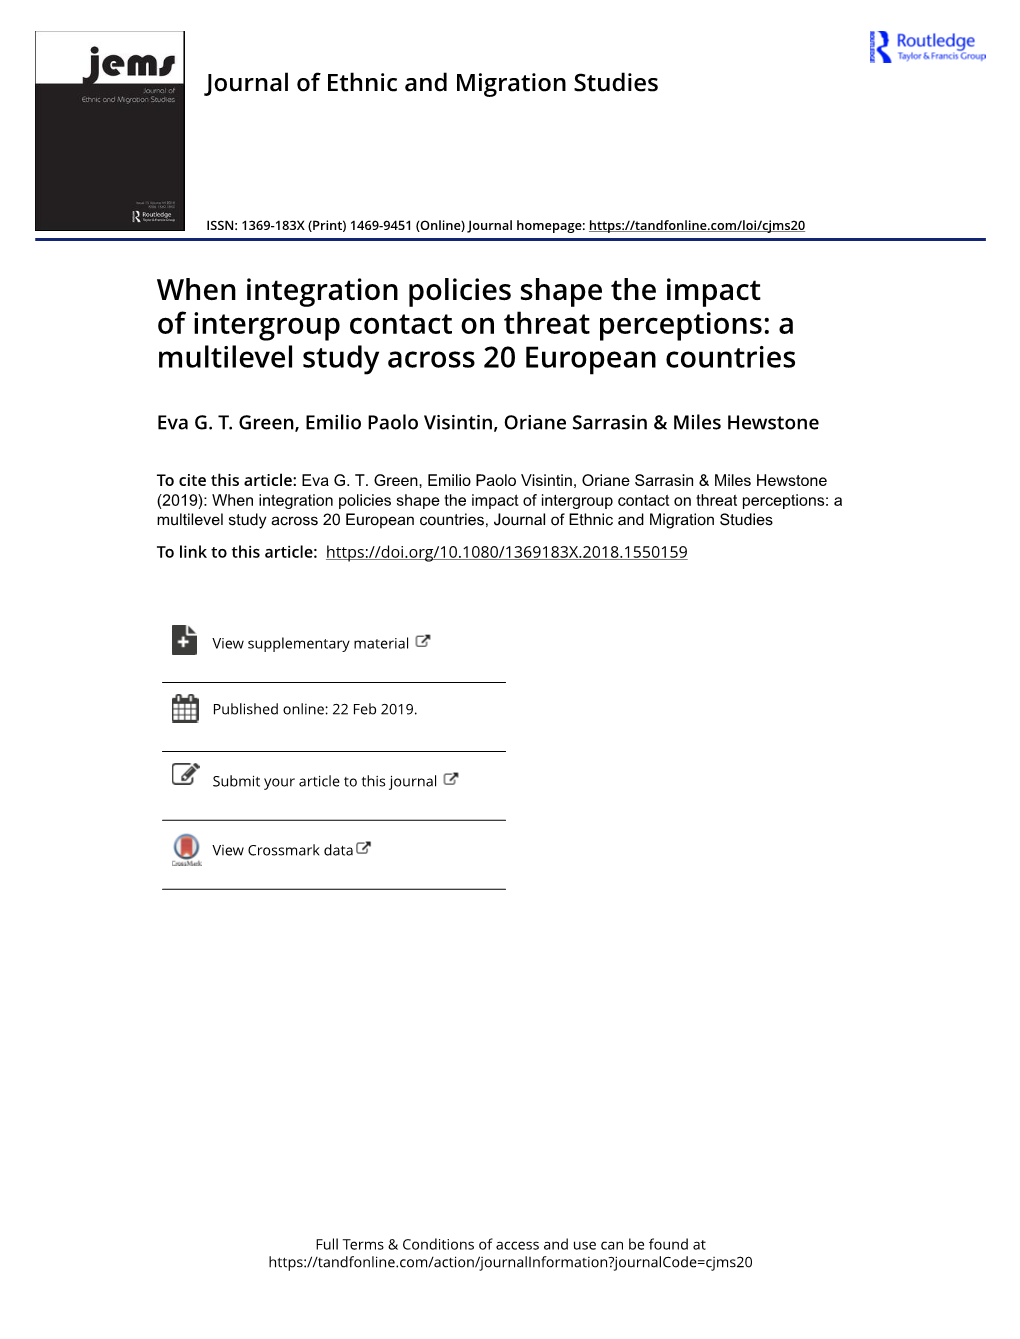 When Integration Policies Shape the Impact of Intergroup Contact on Threat Perceptions: a Multilevel Study Across 20 European Countries